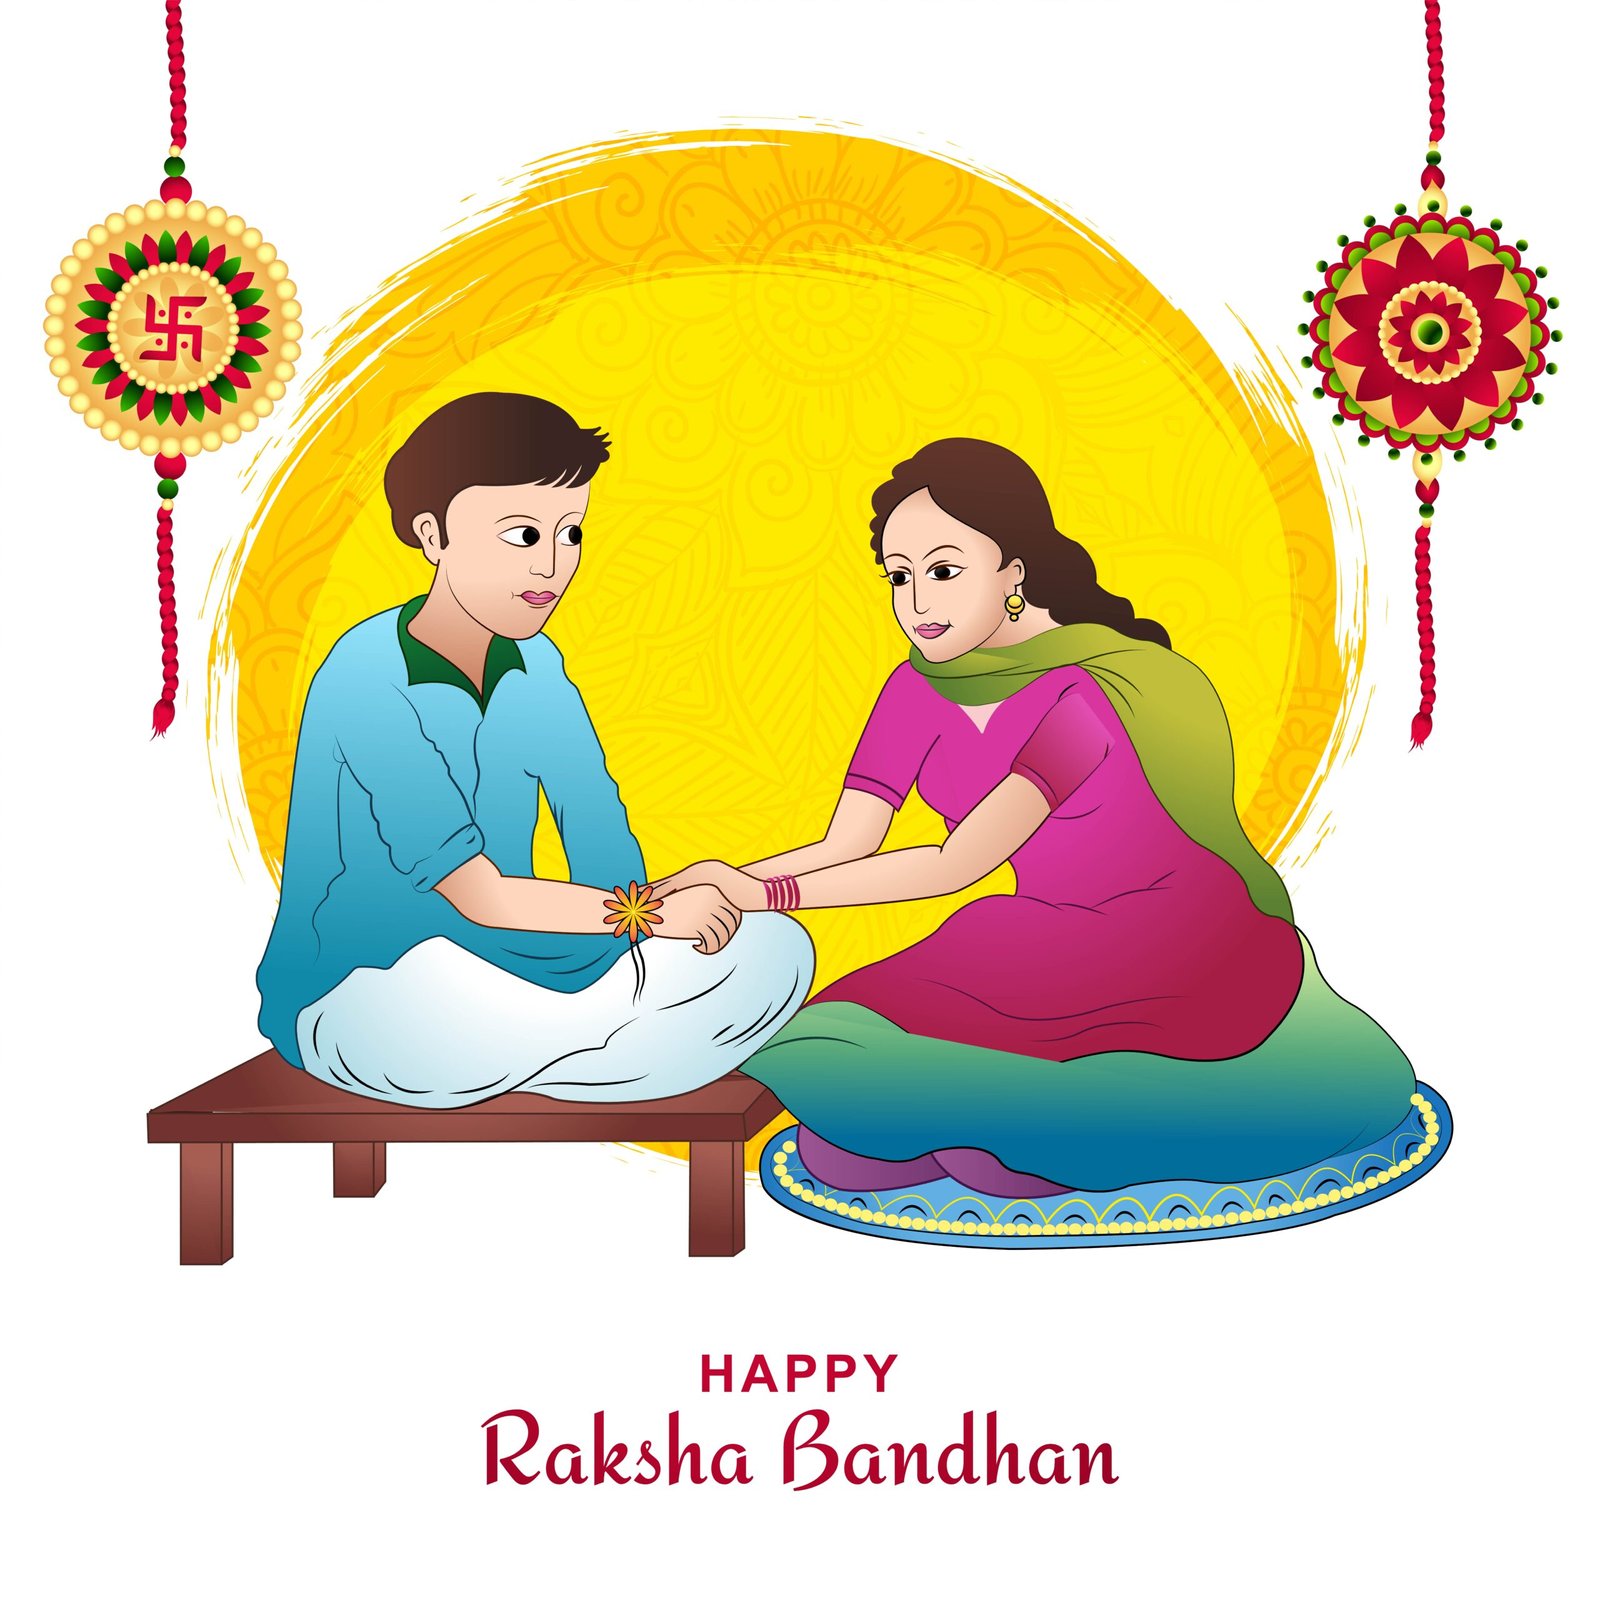 How to draw Indian Festival Rakshabandhan drawing for beginners - YouTube